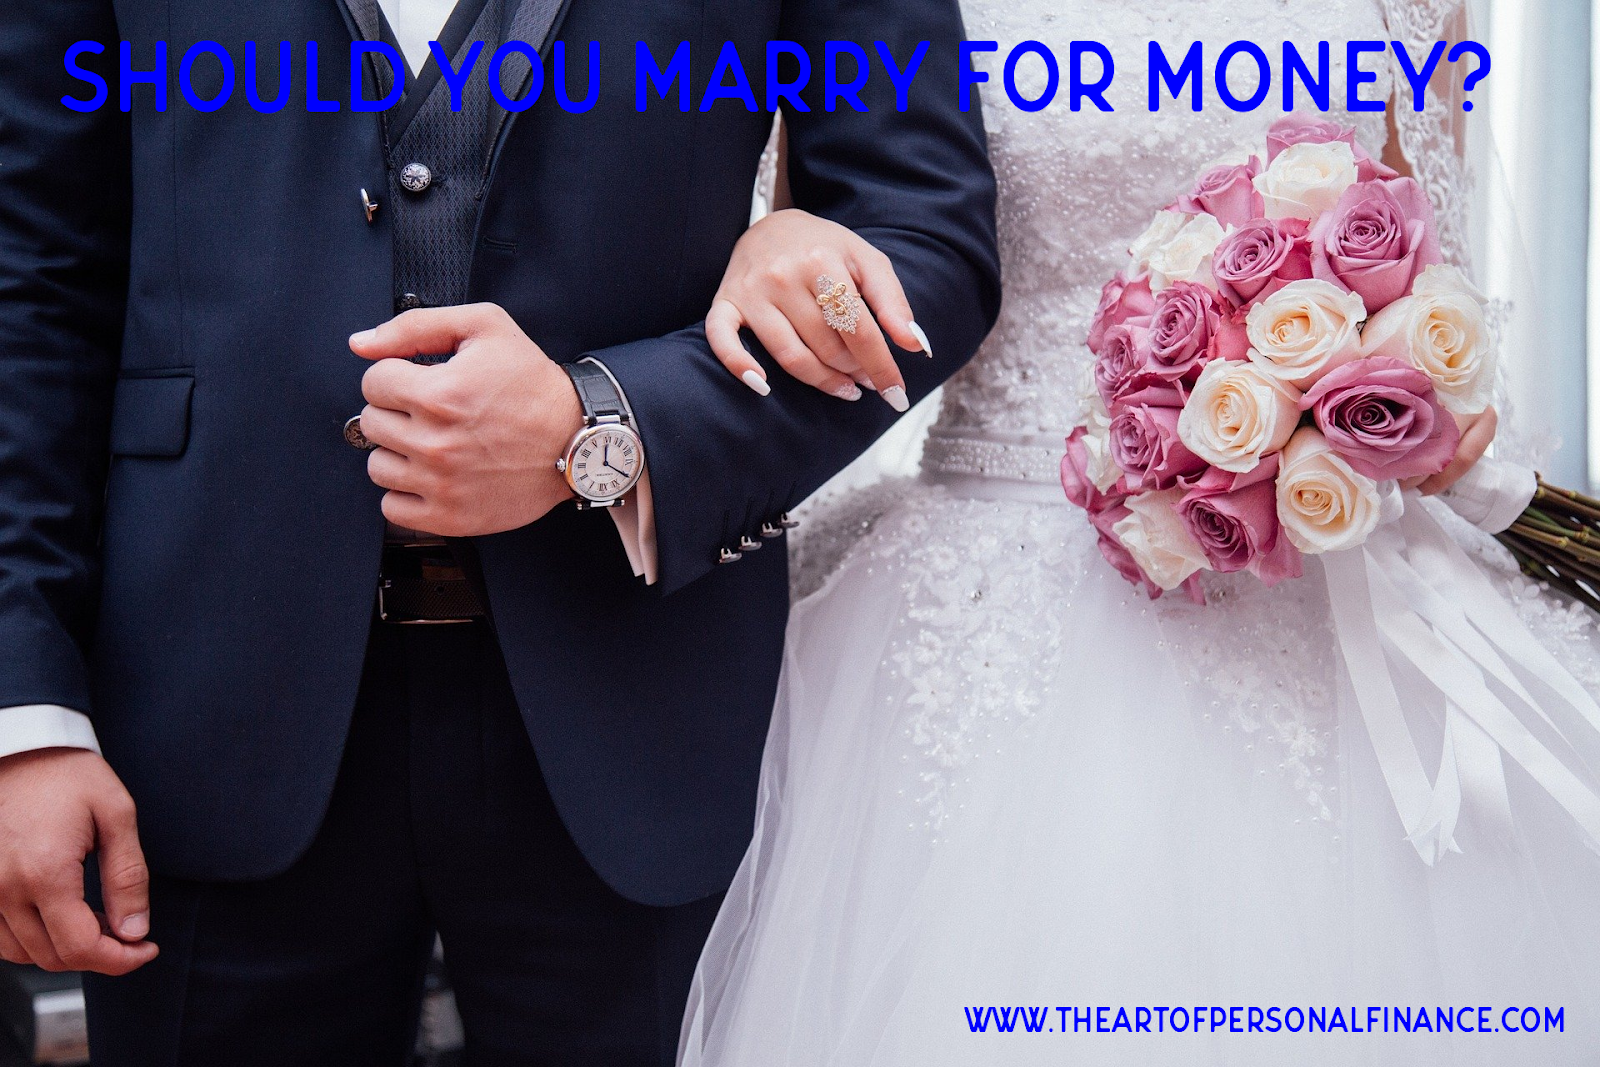 Should You Marry for Money?